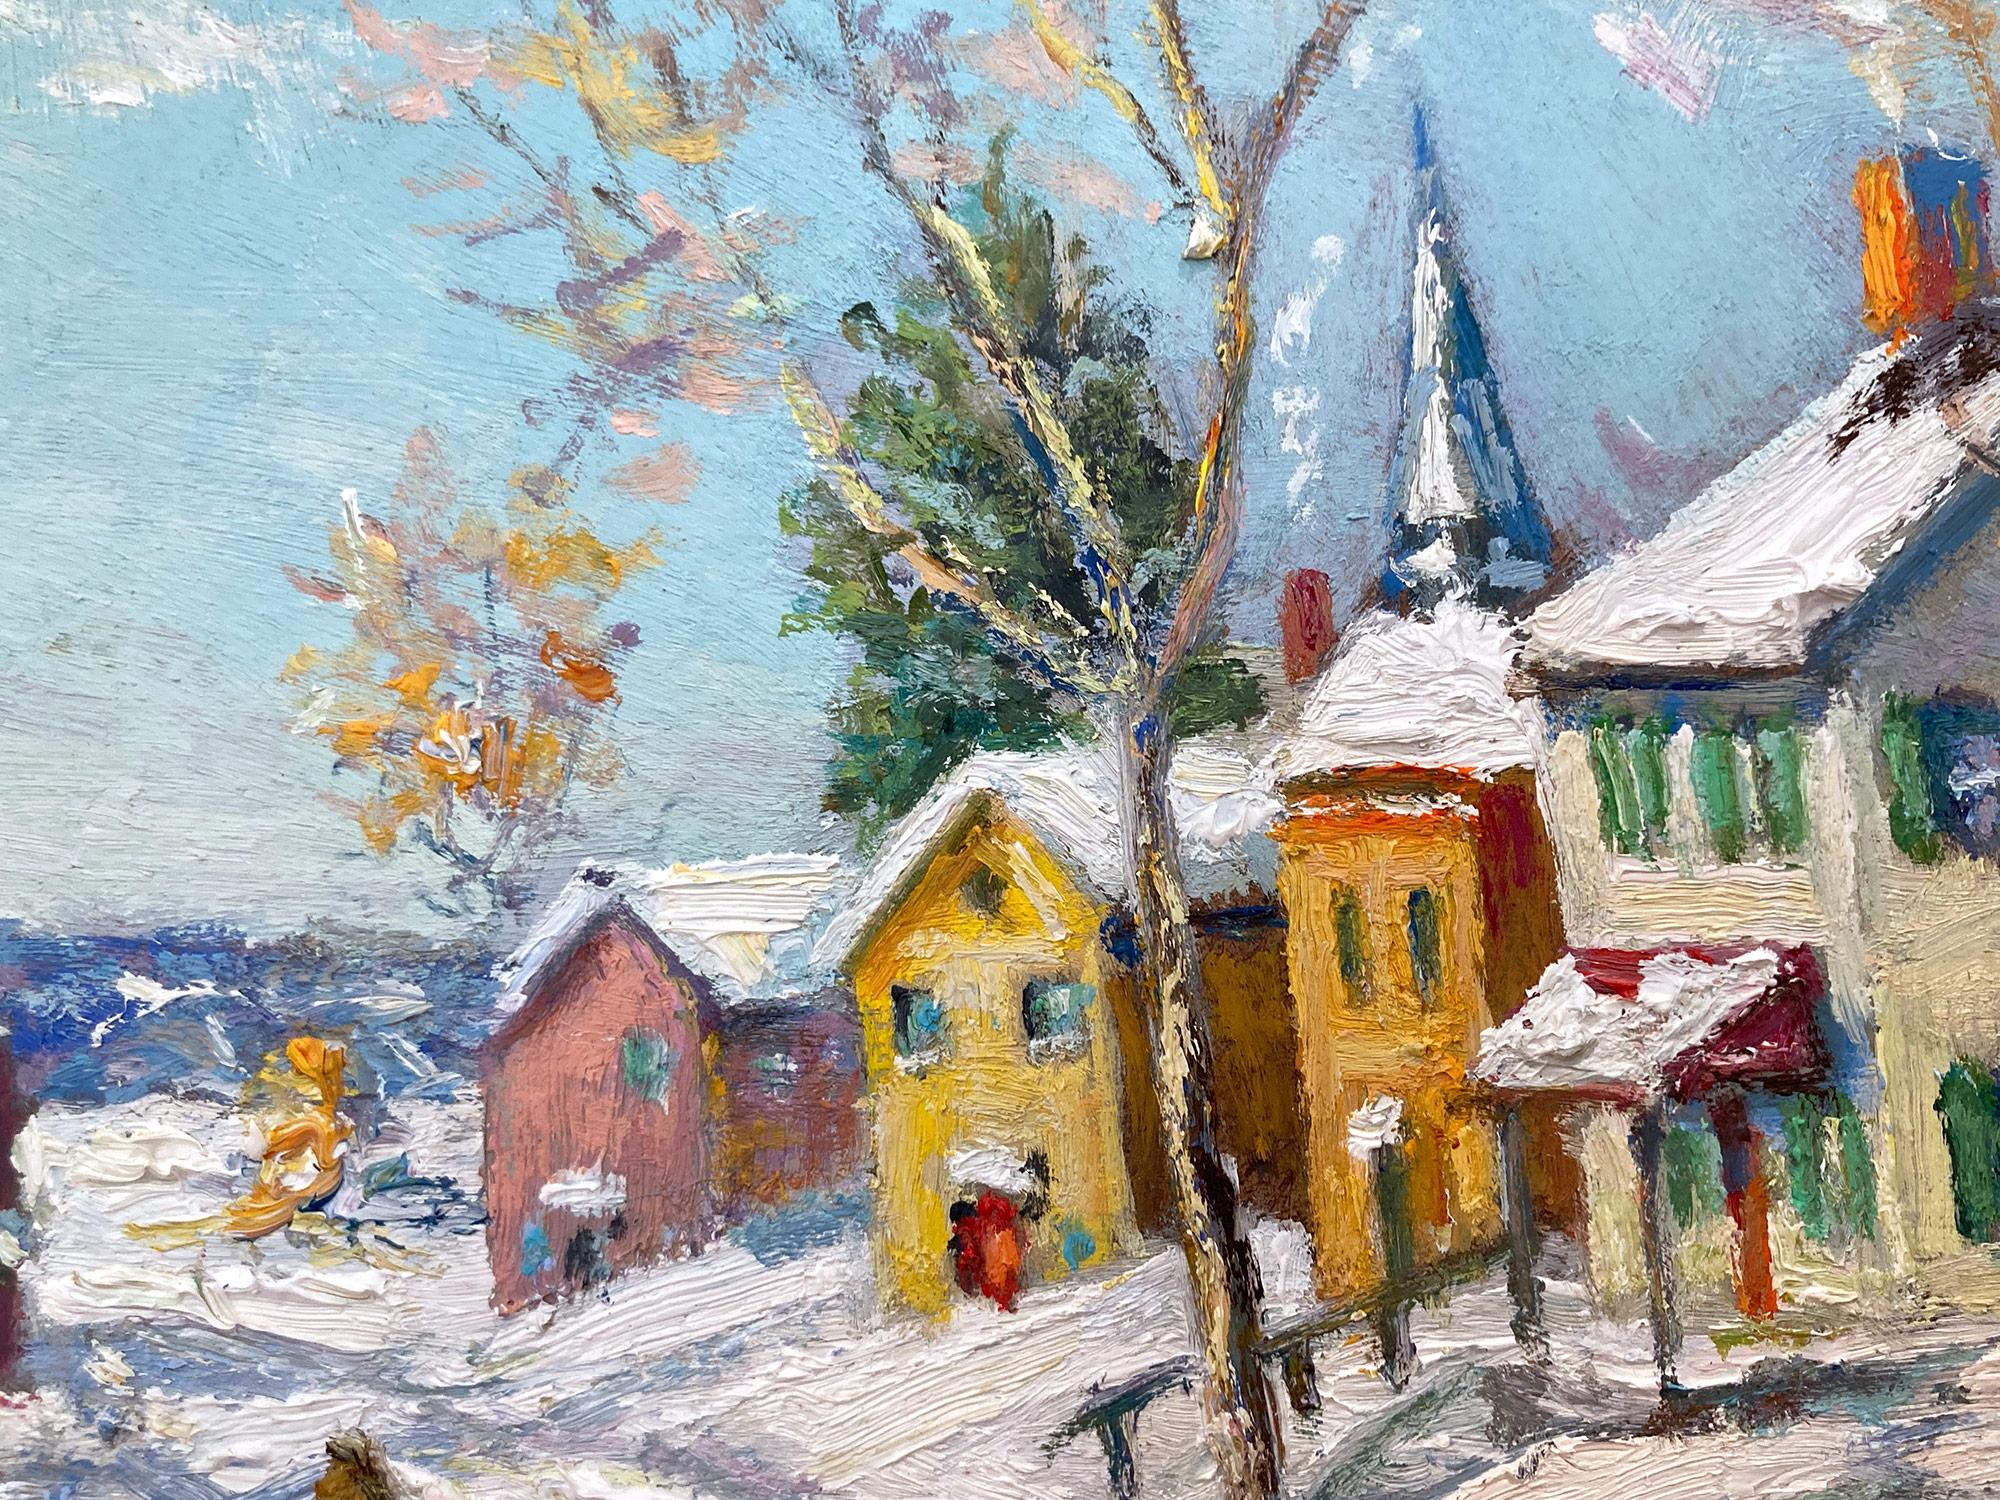 Impressionist winter pastoral scene of a quaint snow covered town with Figure on Sleigh and Horse by Bucks County, PA. Willett has portrayed this charming piece in a most intimate, yet energetic way, and has packed much feeling into this miniature